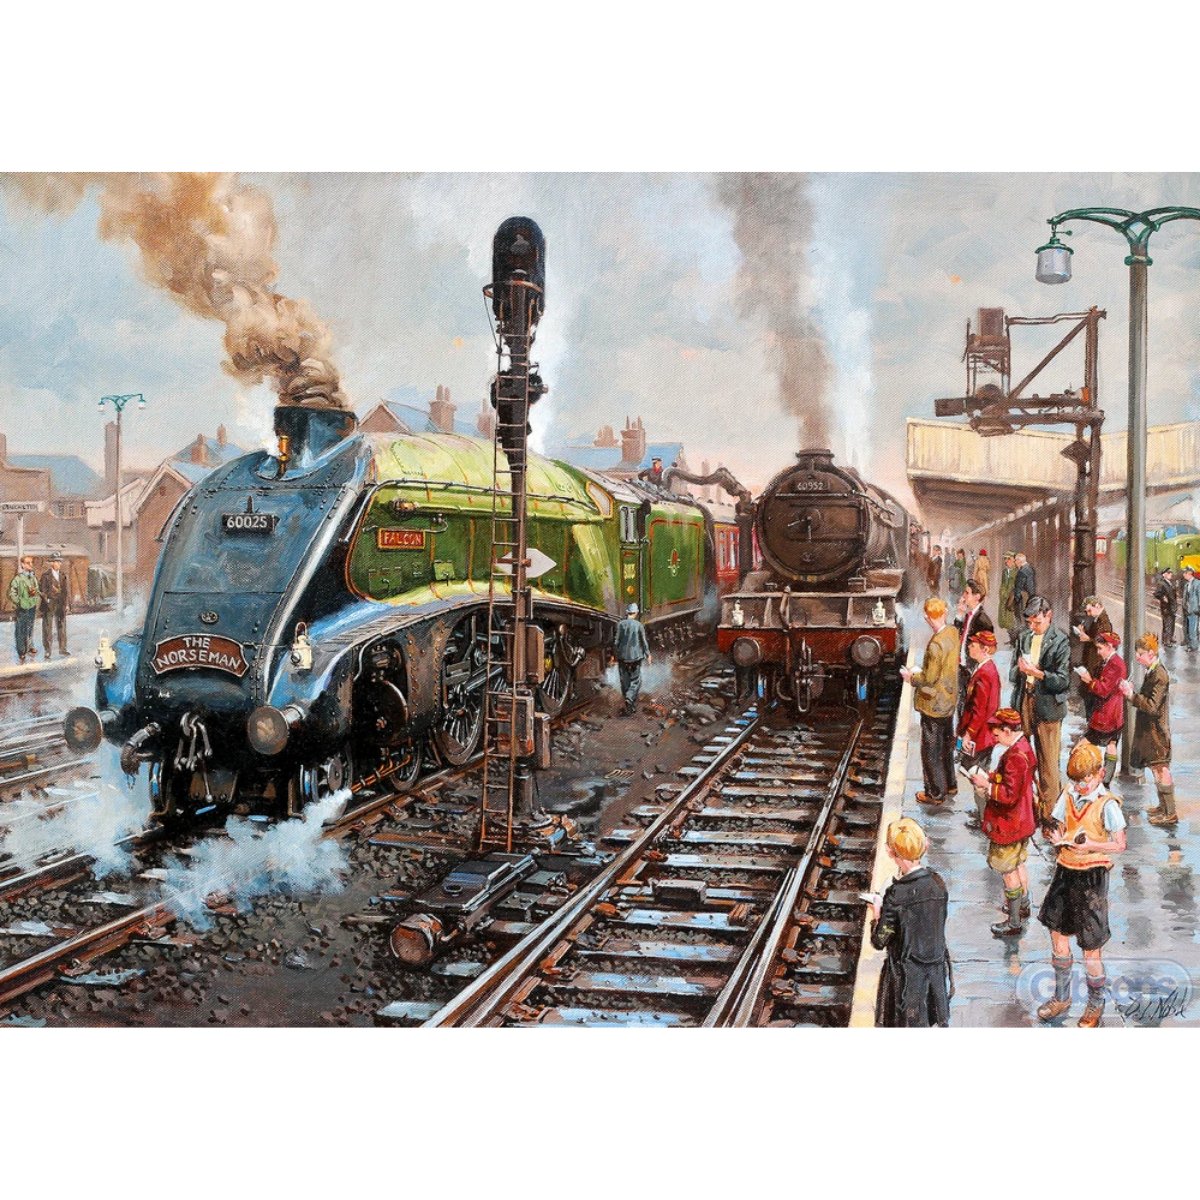 Gibsons Spotters at Doncaster Jigsaw Puzzle (1000 Pieces)